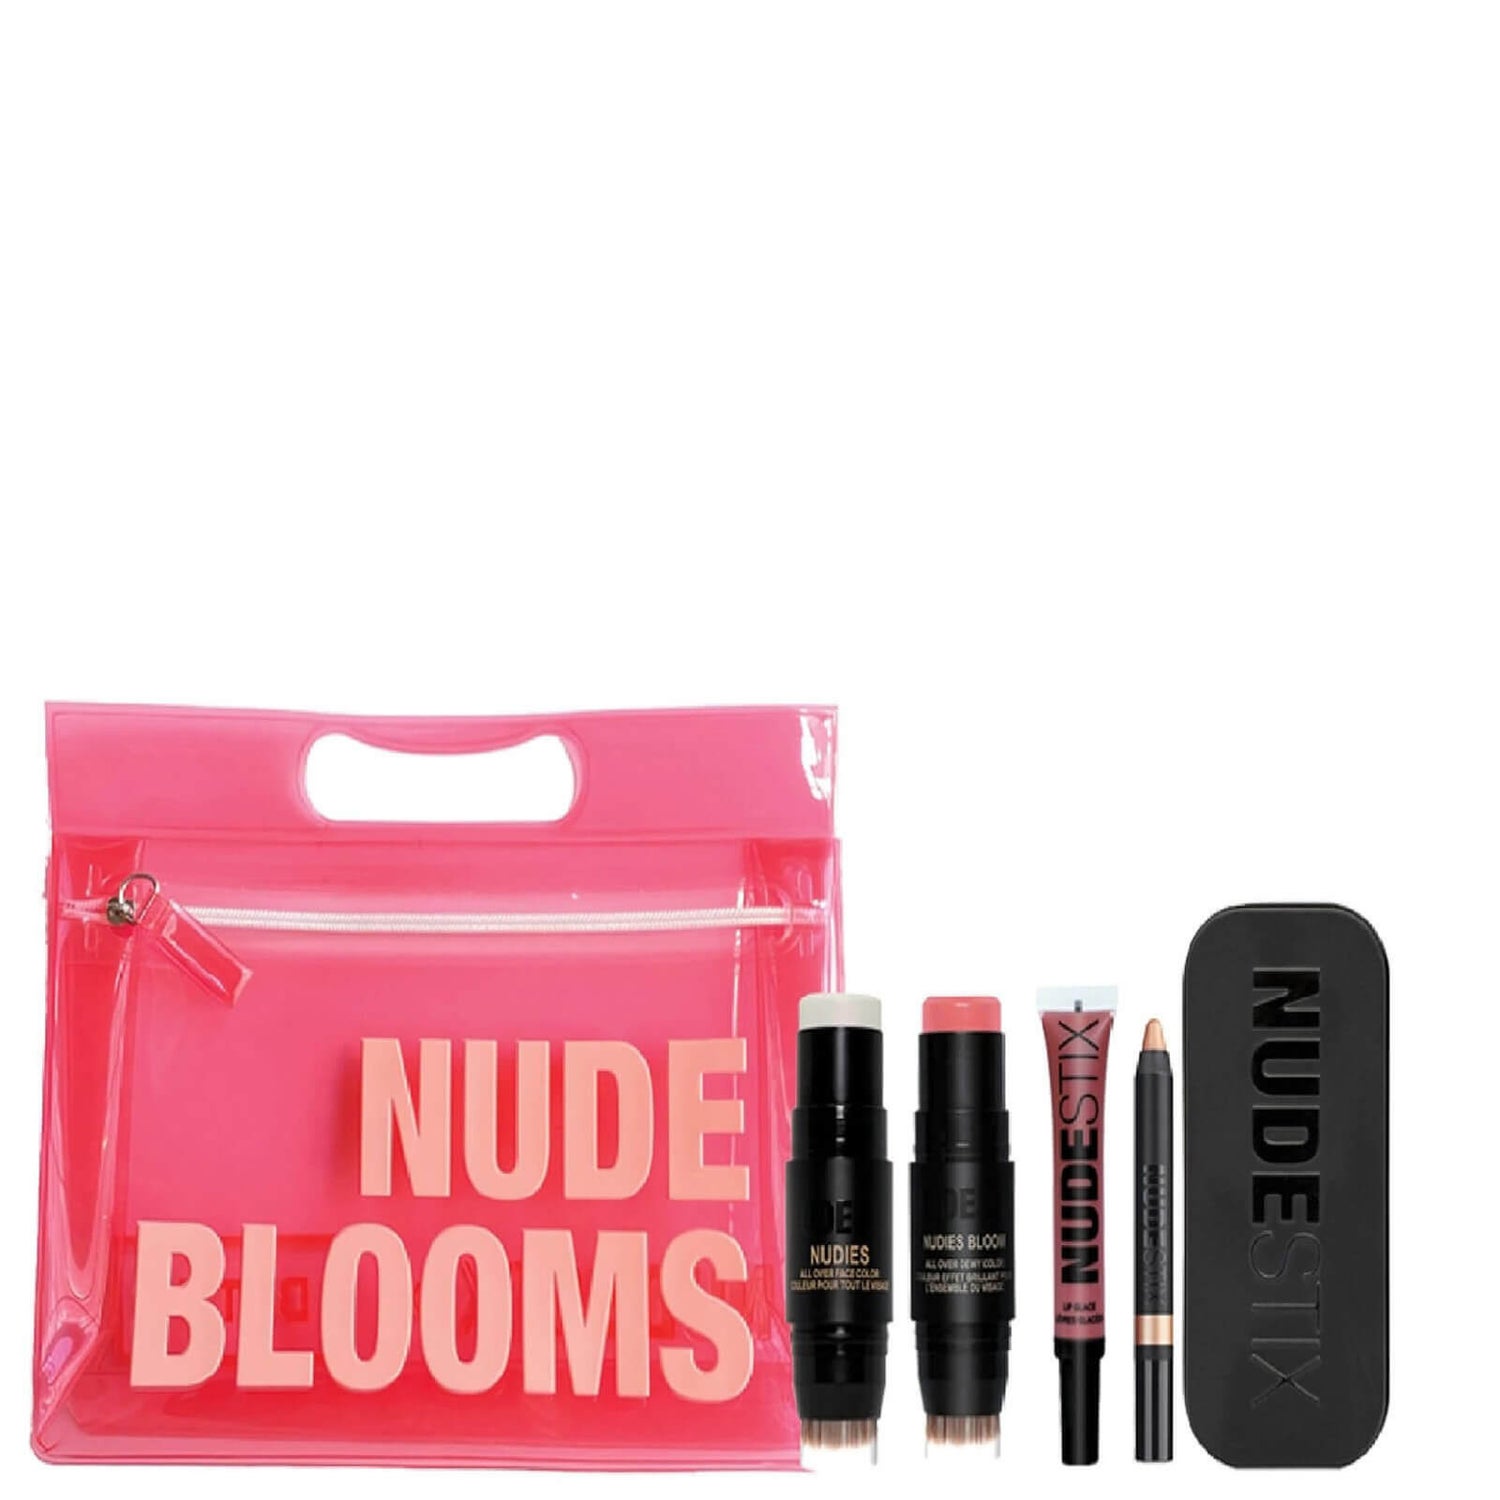 NUDESTIX Nude Blooms by Pony Park Kit (Worth £128.00)